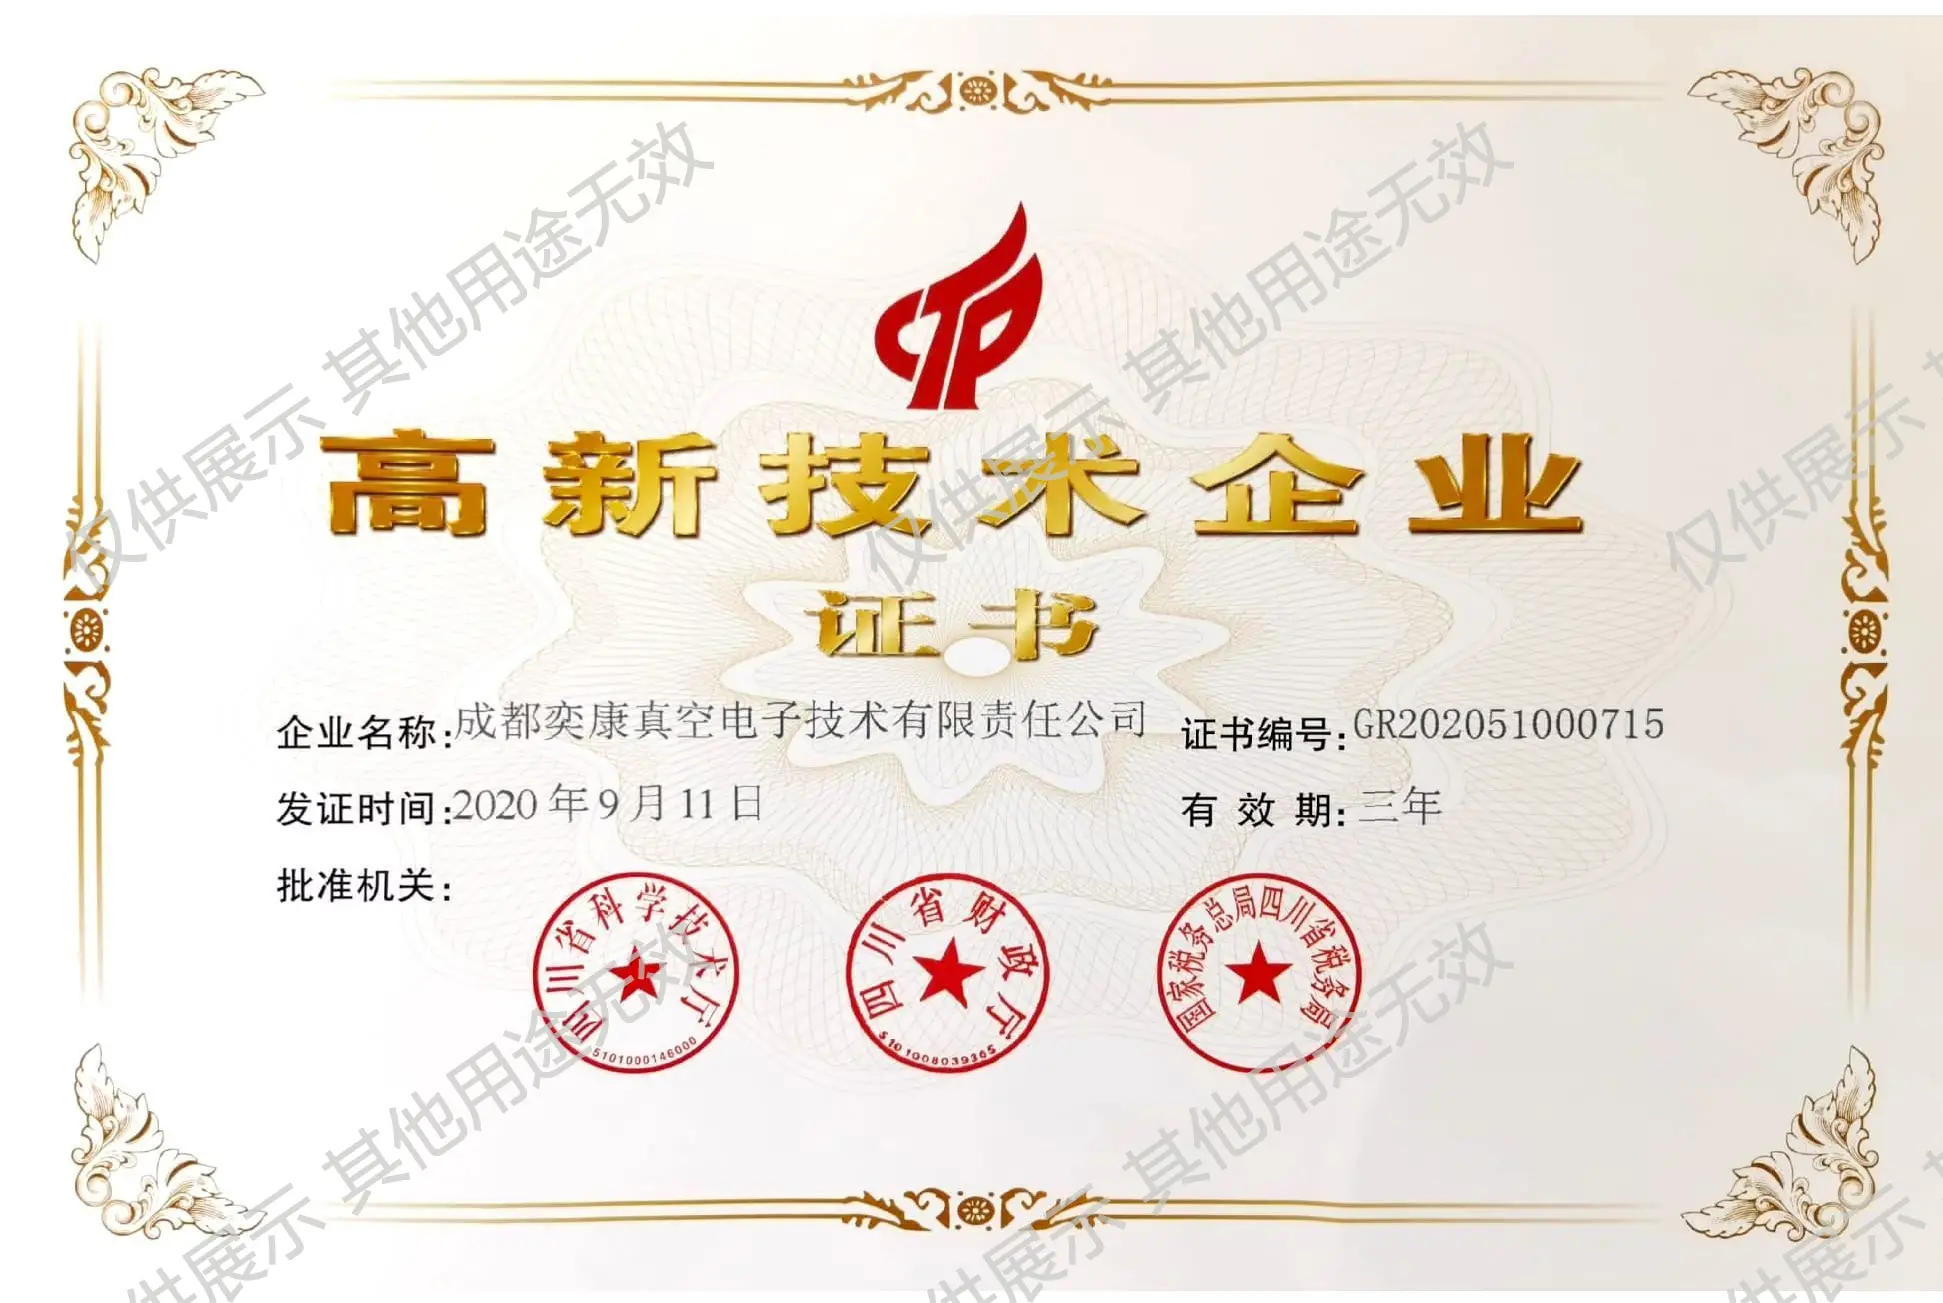 Good News: Warmly Congratulation to Our Company on Being Recognized as A National High-tech Enterprise